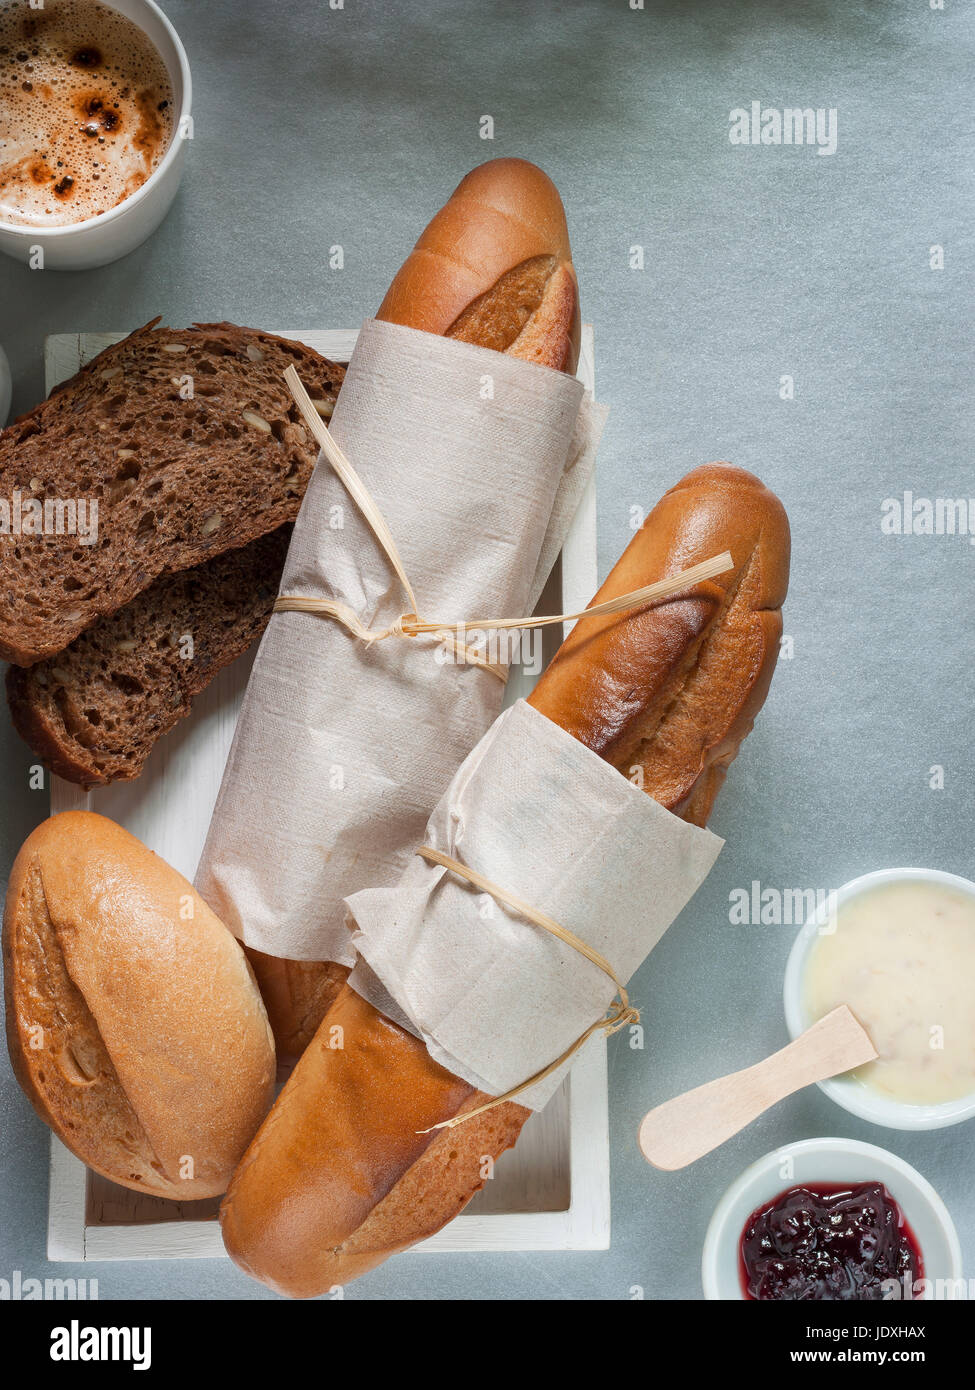 bakery cereal bread home made and mixers fresh for everyday breakfast or coffee time healthy life style food on white background Stock Photo